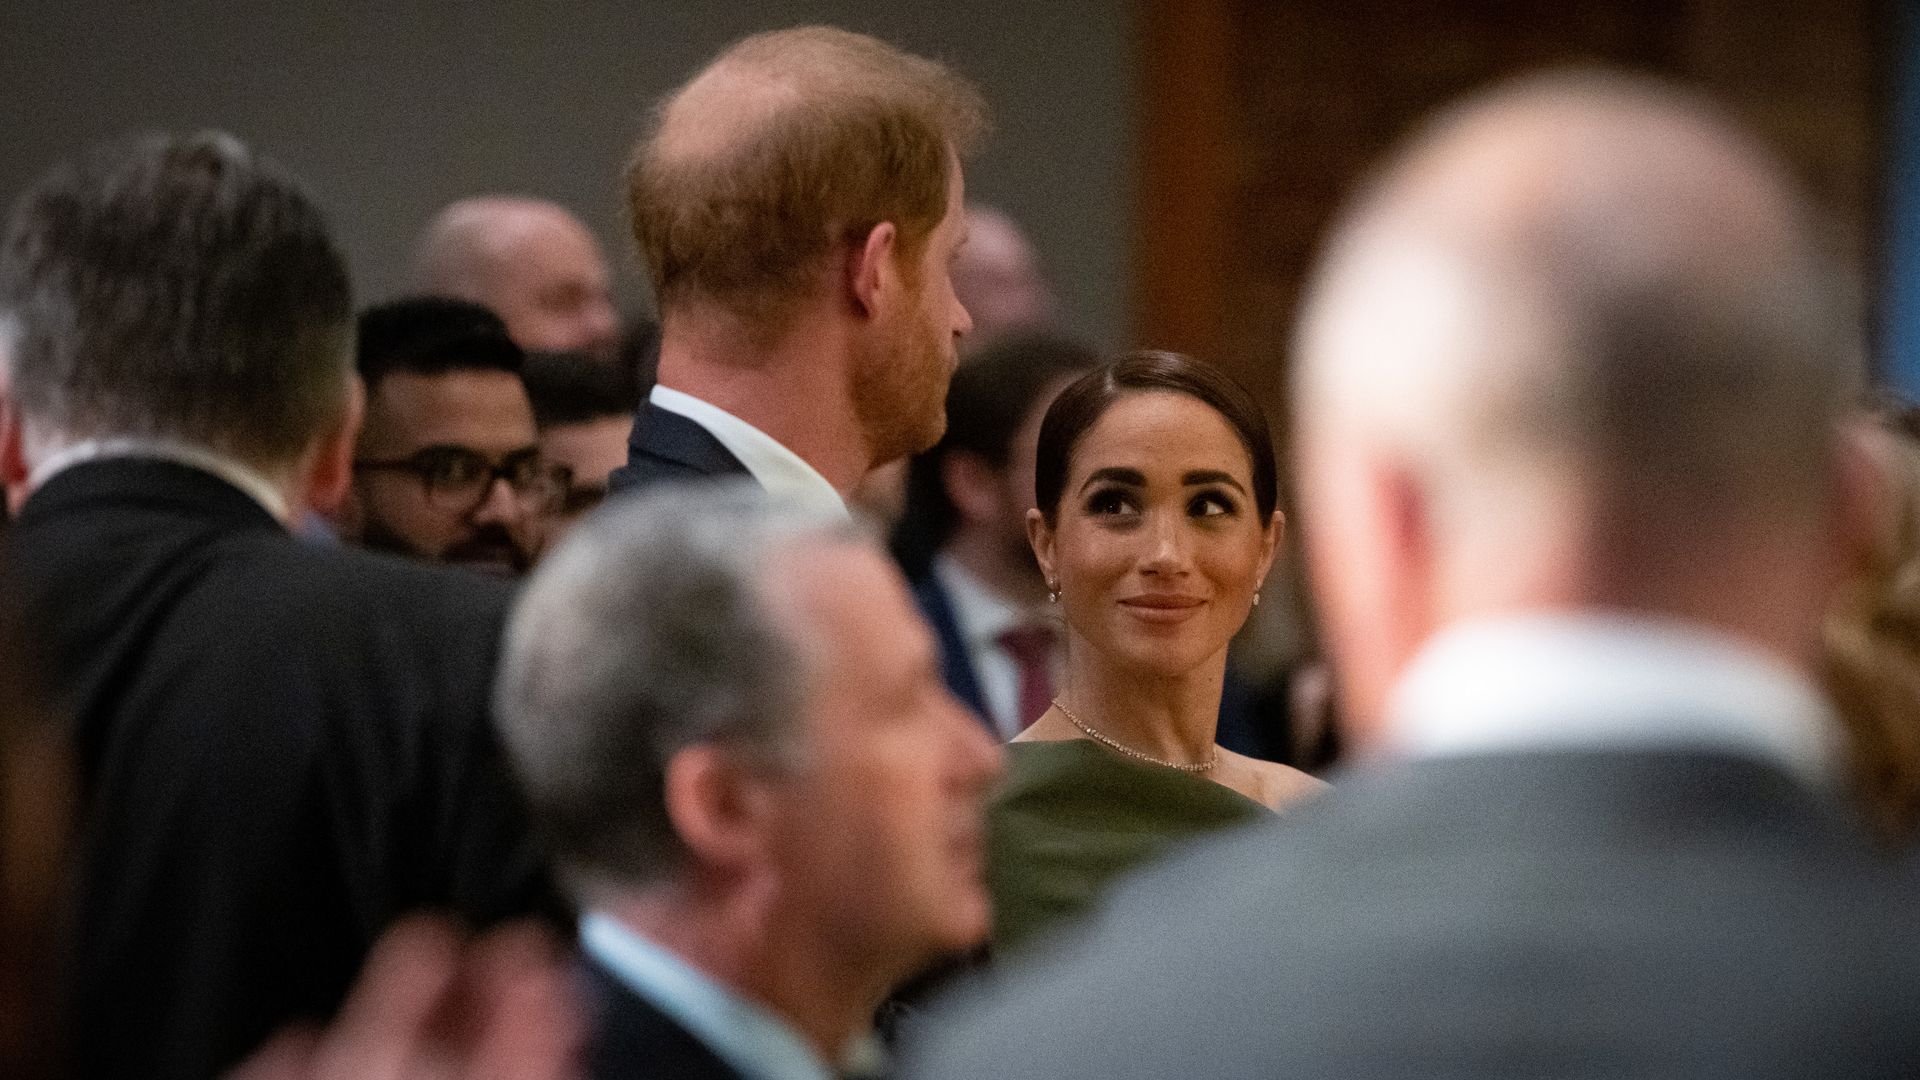 Meghan, the Duchess of Sussex, smiles at Prince Harry, the Duke of Sussex during the "One Year to Go" Invictus Games dinner 